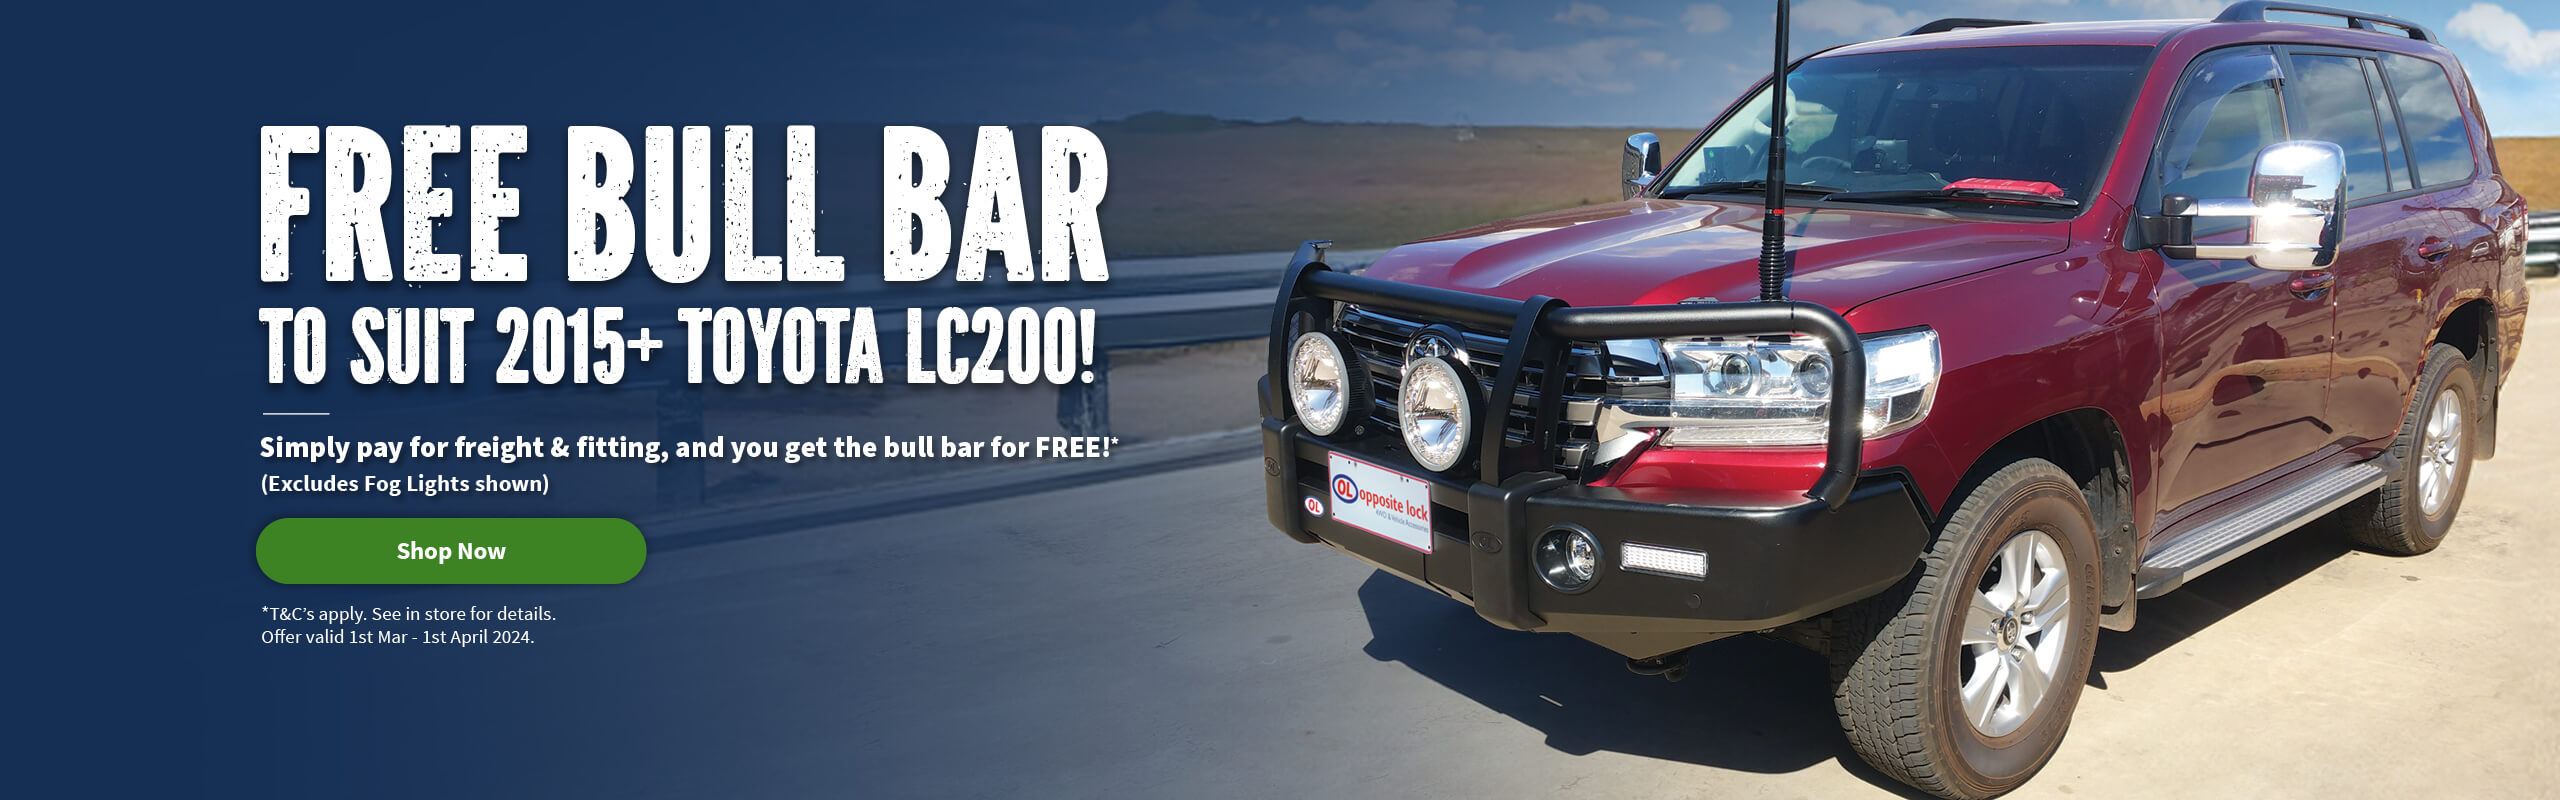 FREE BULL BAR TO SUIT 2015+ TOYOTA LC200!